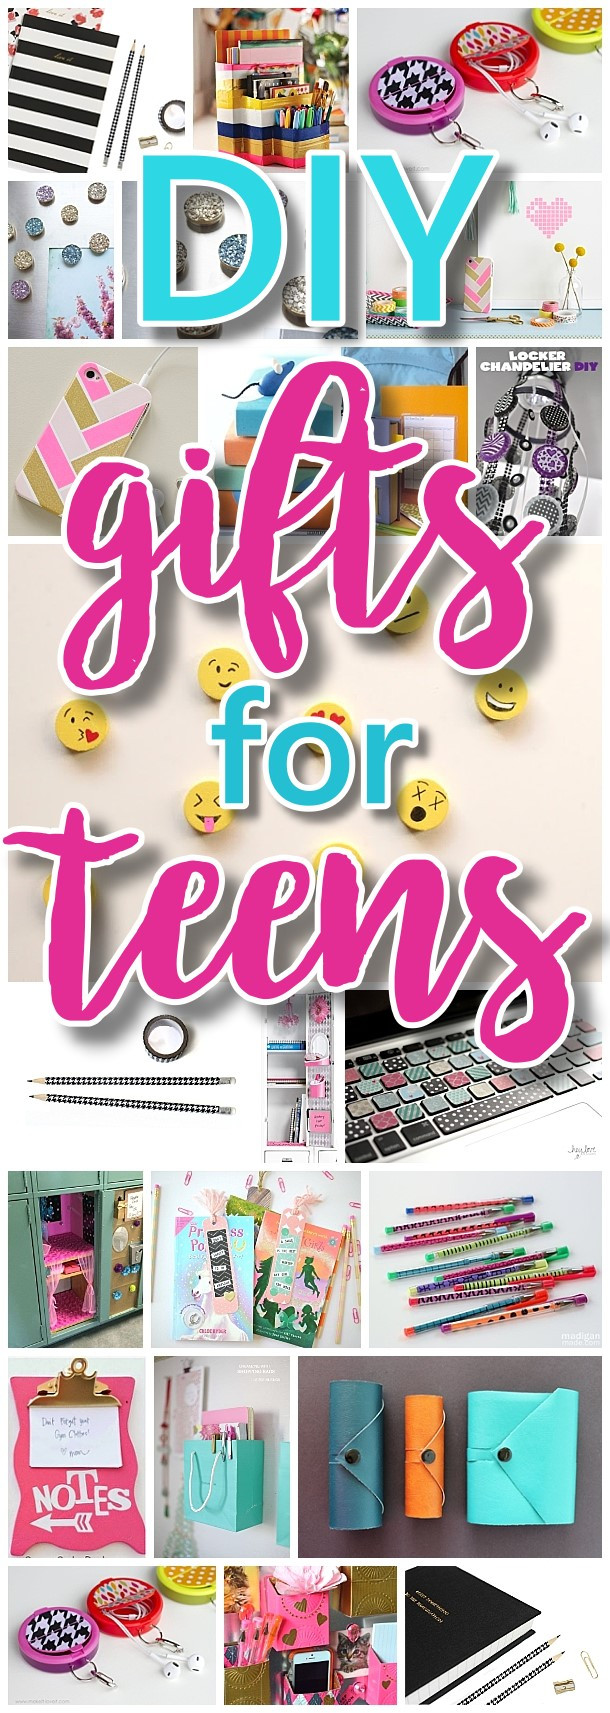 Diy Gift Ideas For Best Friend
 The BEST DIY Gifts for Teens Tweens and Best Friends